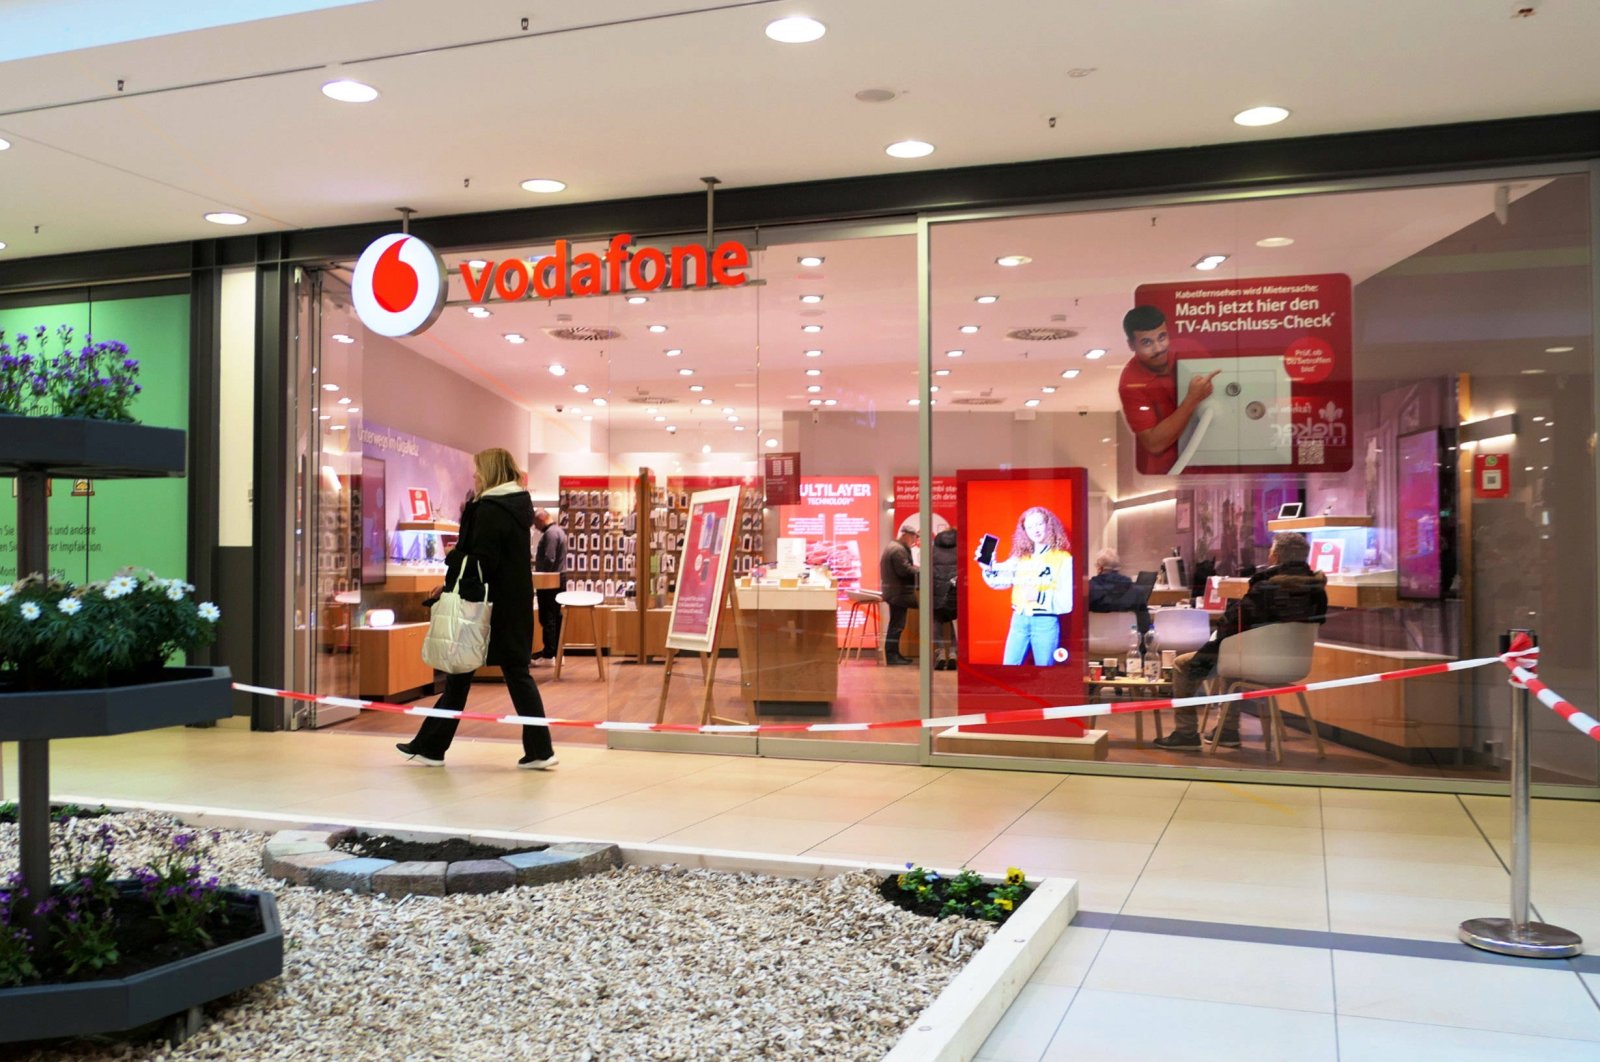 A Vodafone store is seen in a mall in Hannover, Germany, March 18, 2024. (Reuters Photo)